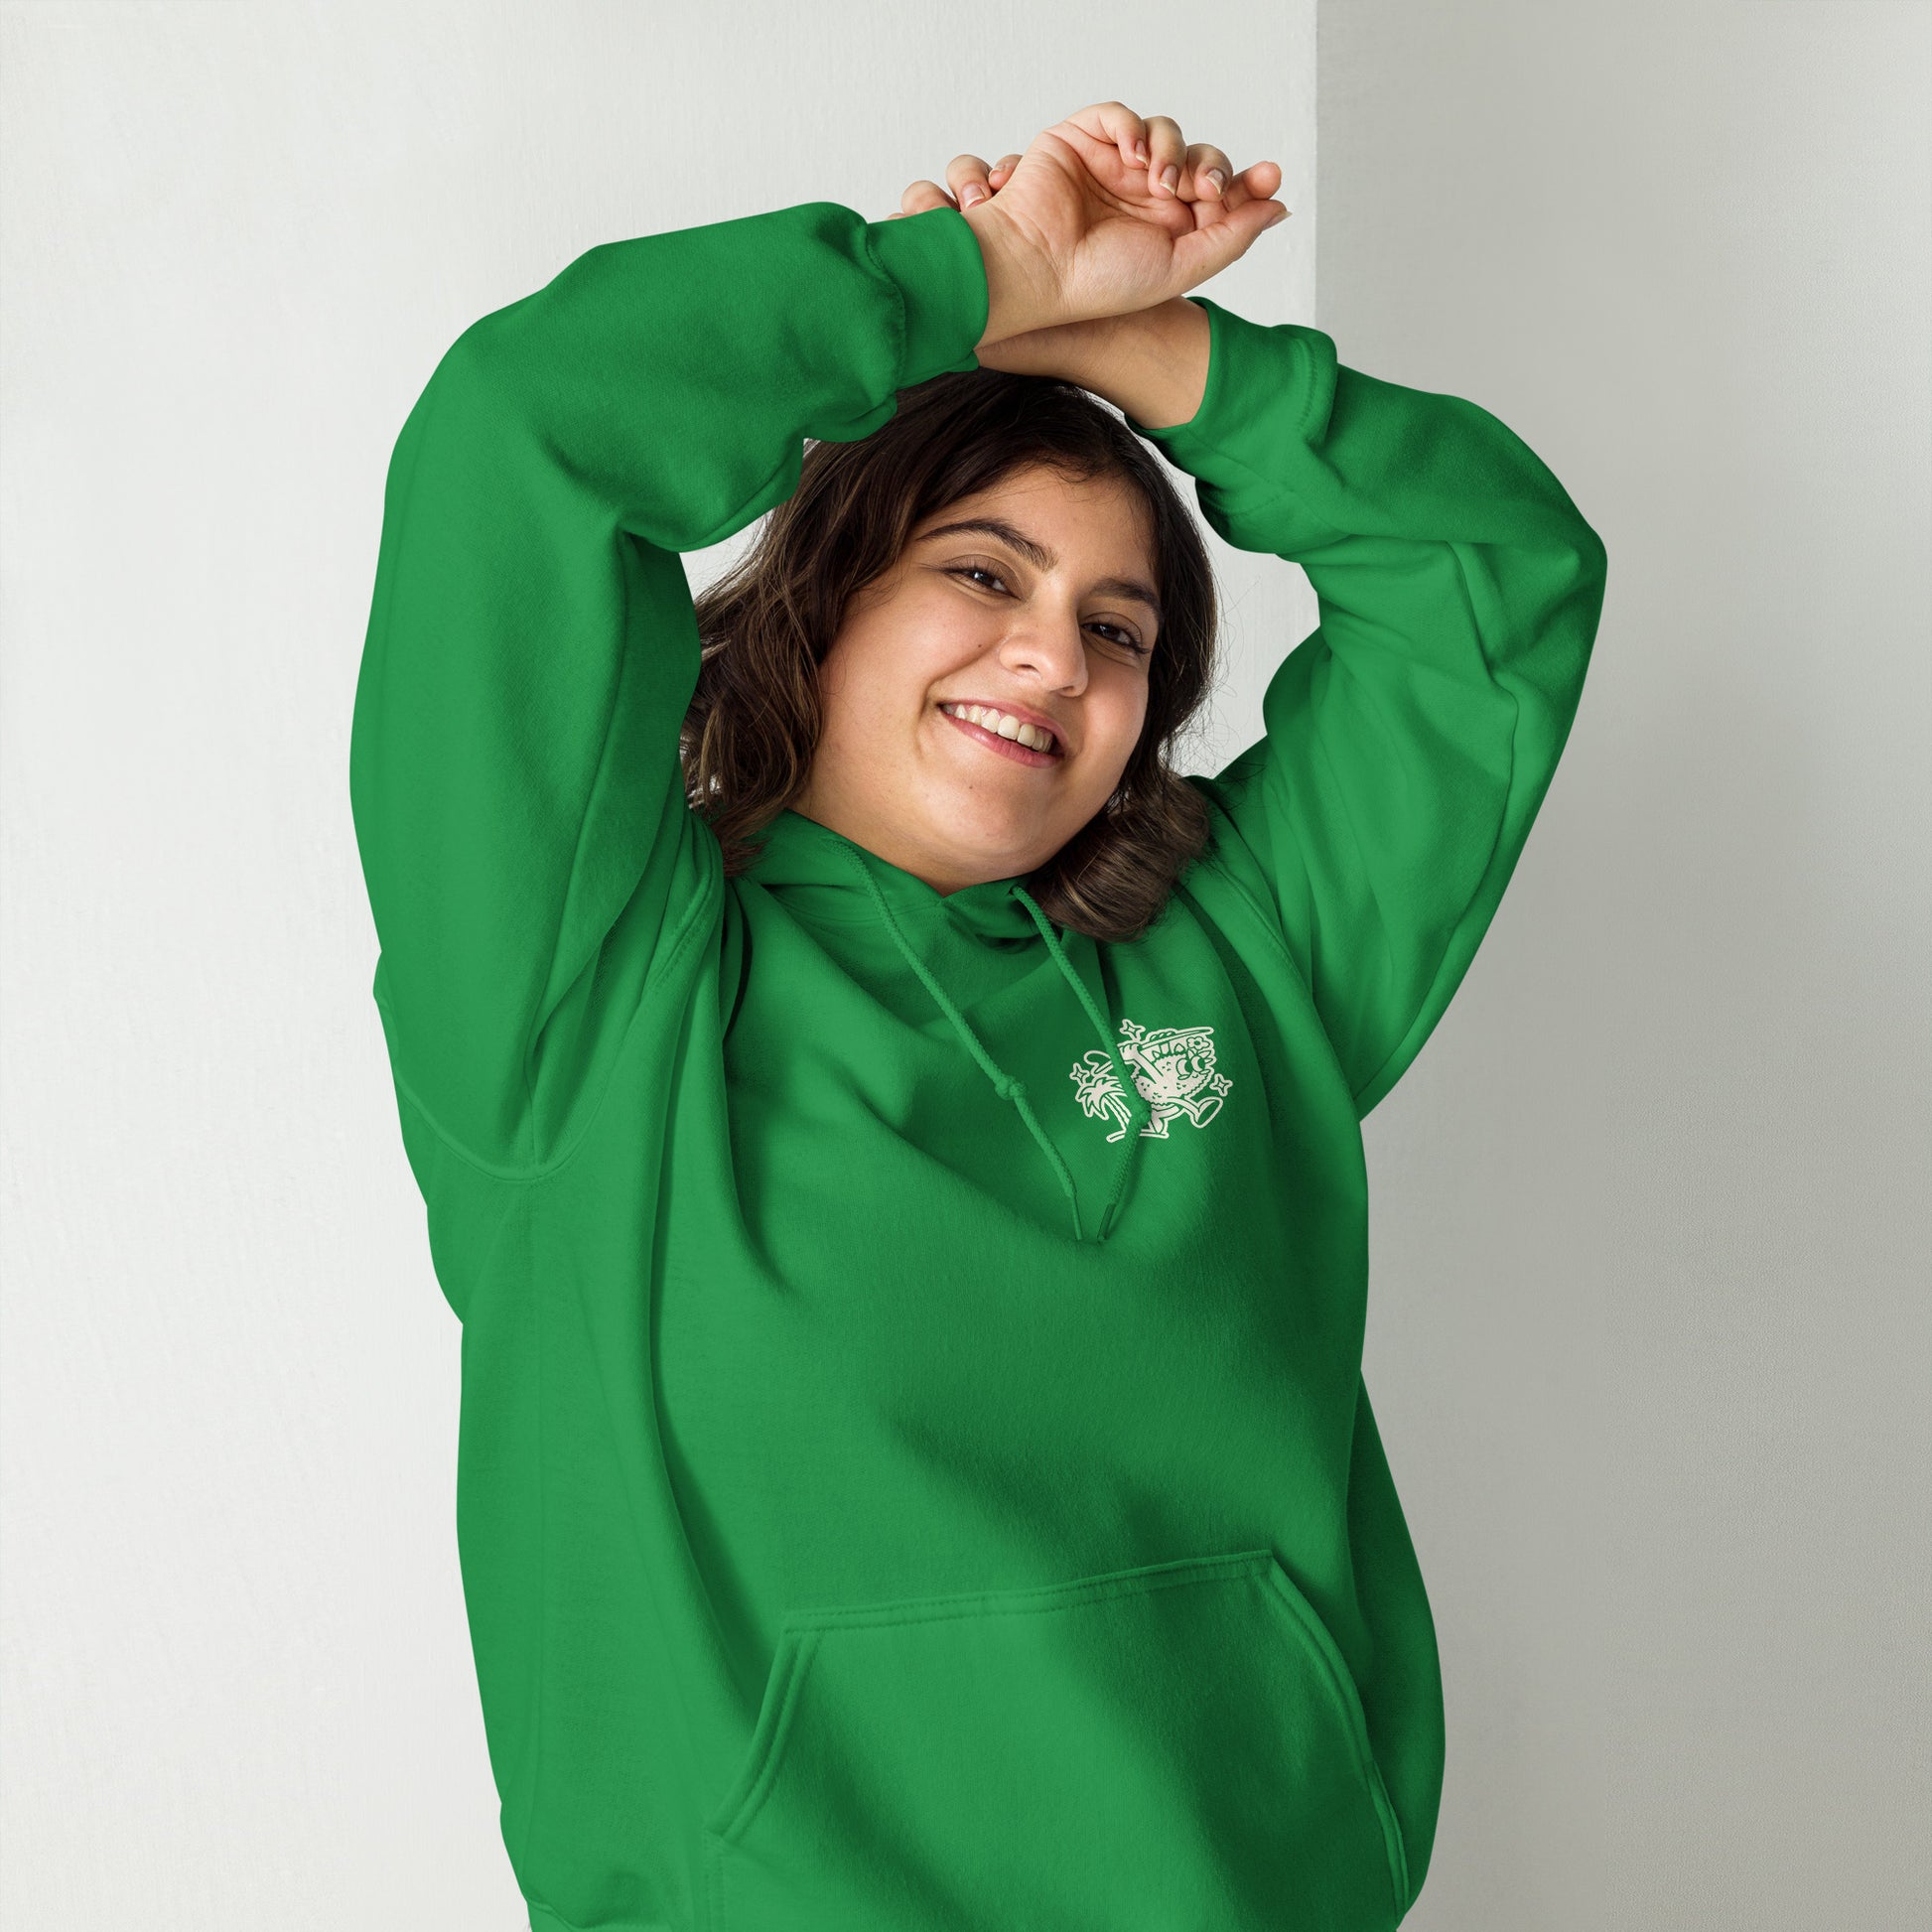 Female model wearing Ting's green unisex hoodie with Ting's logo on front